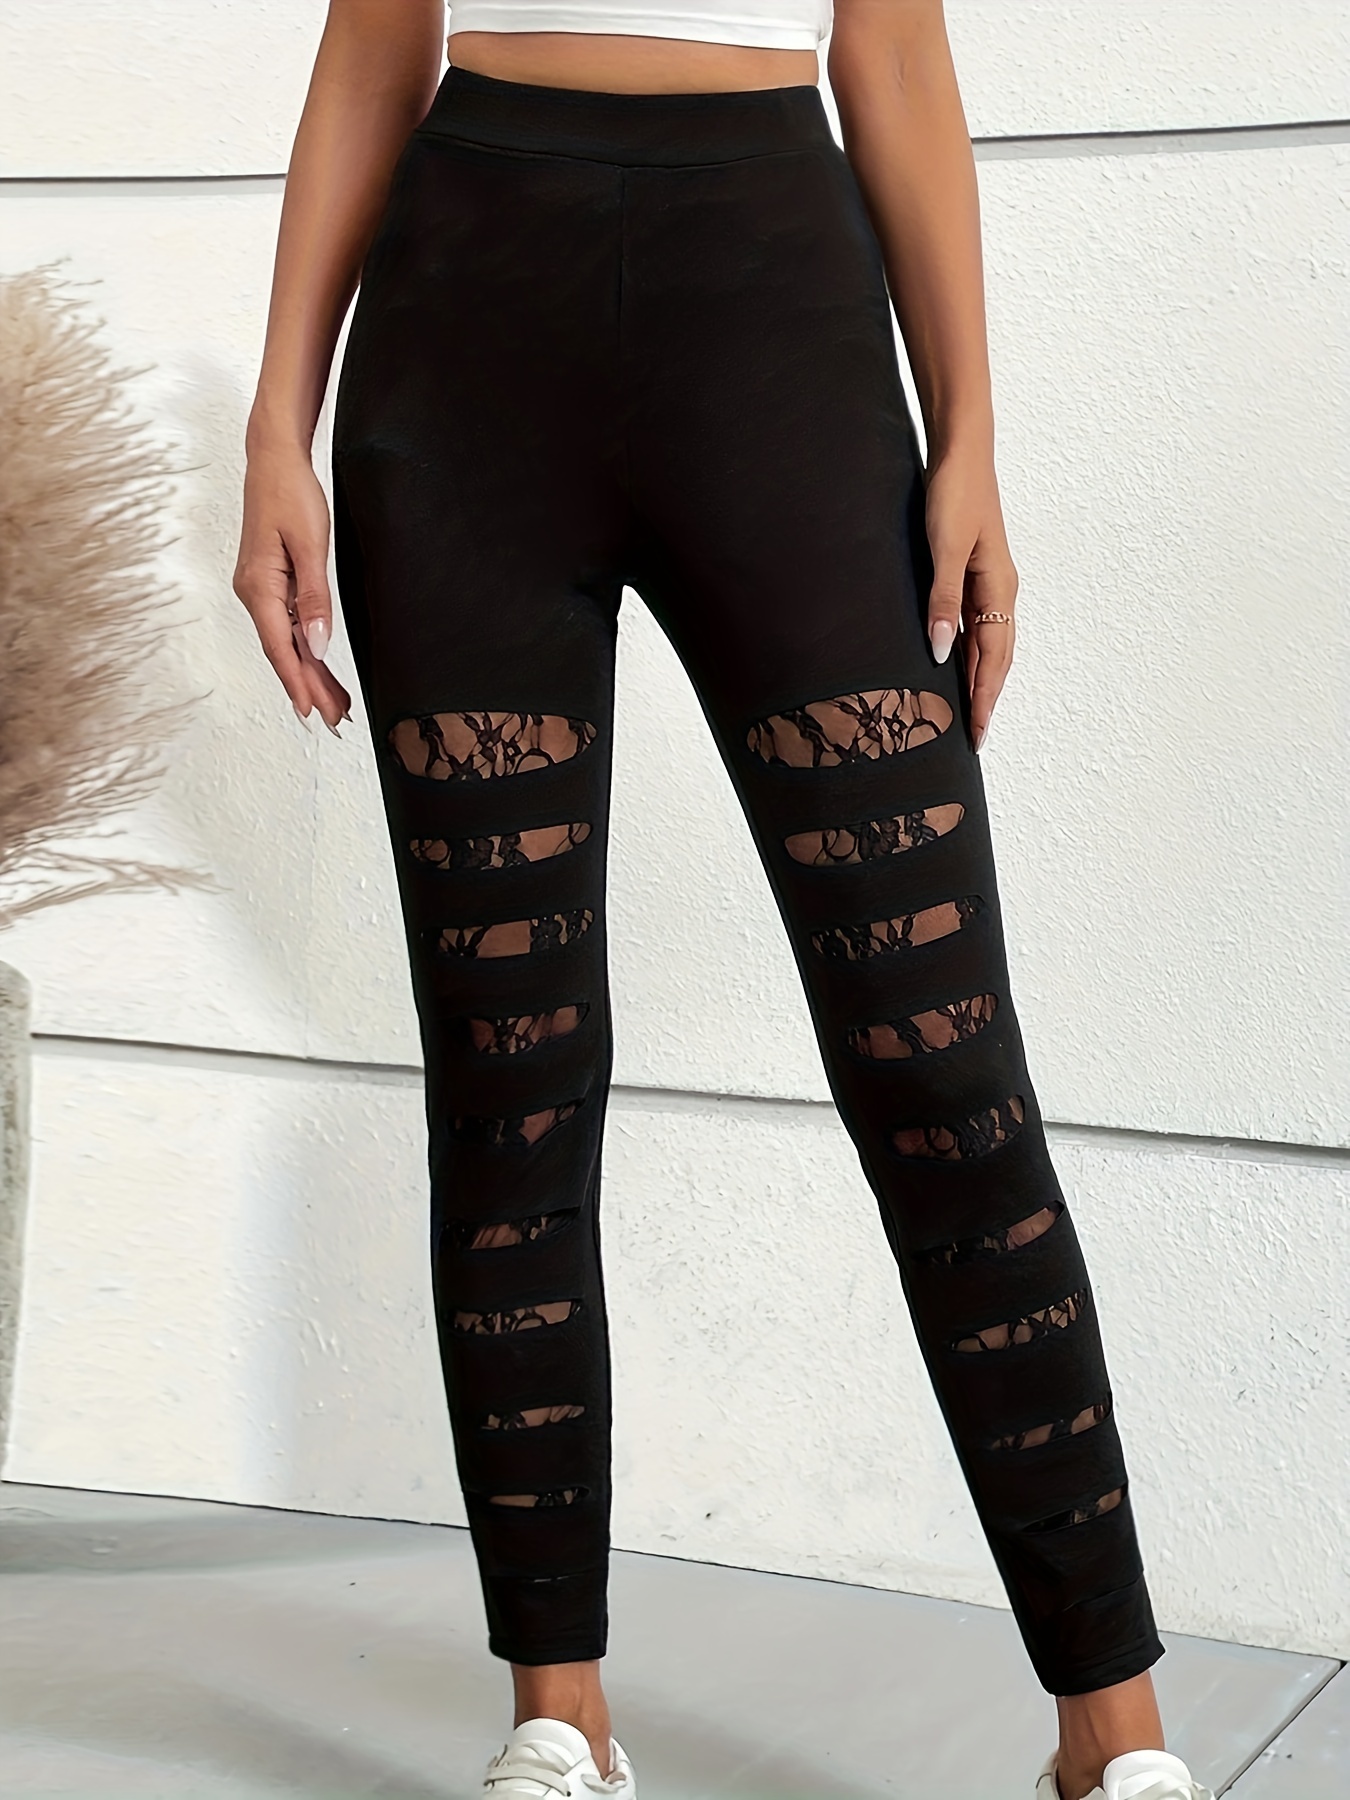 Plus Size Sexy Pants, Women's Plus Lace Up Front High Waisted Medium  Stretch Skinny Leggings